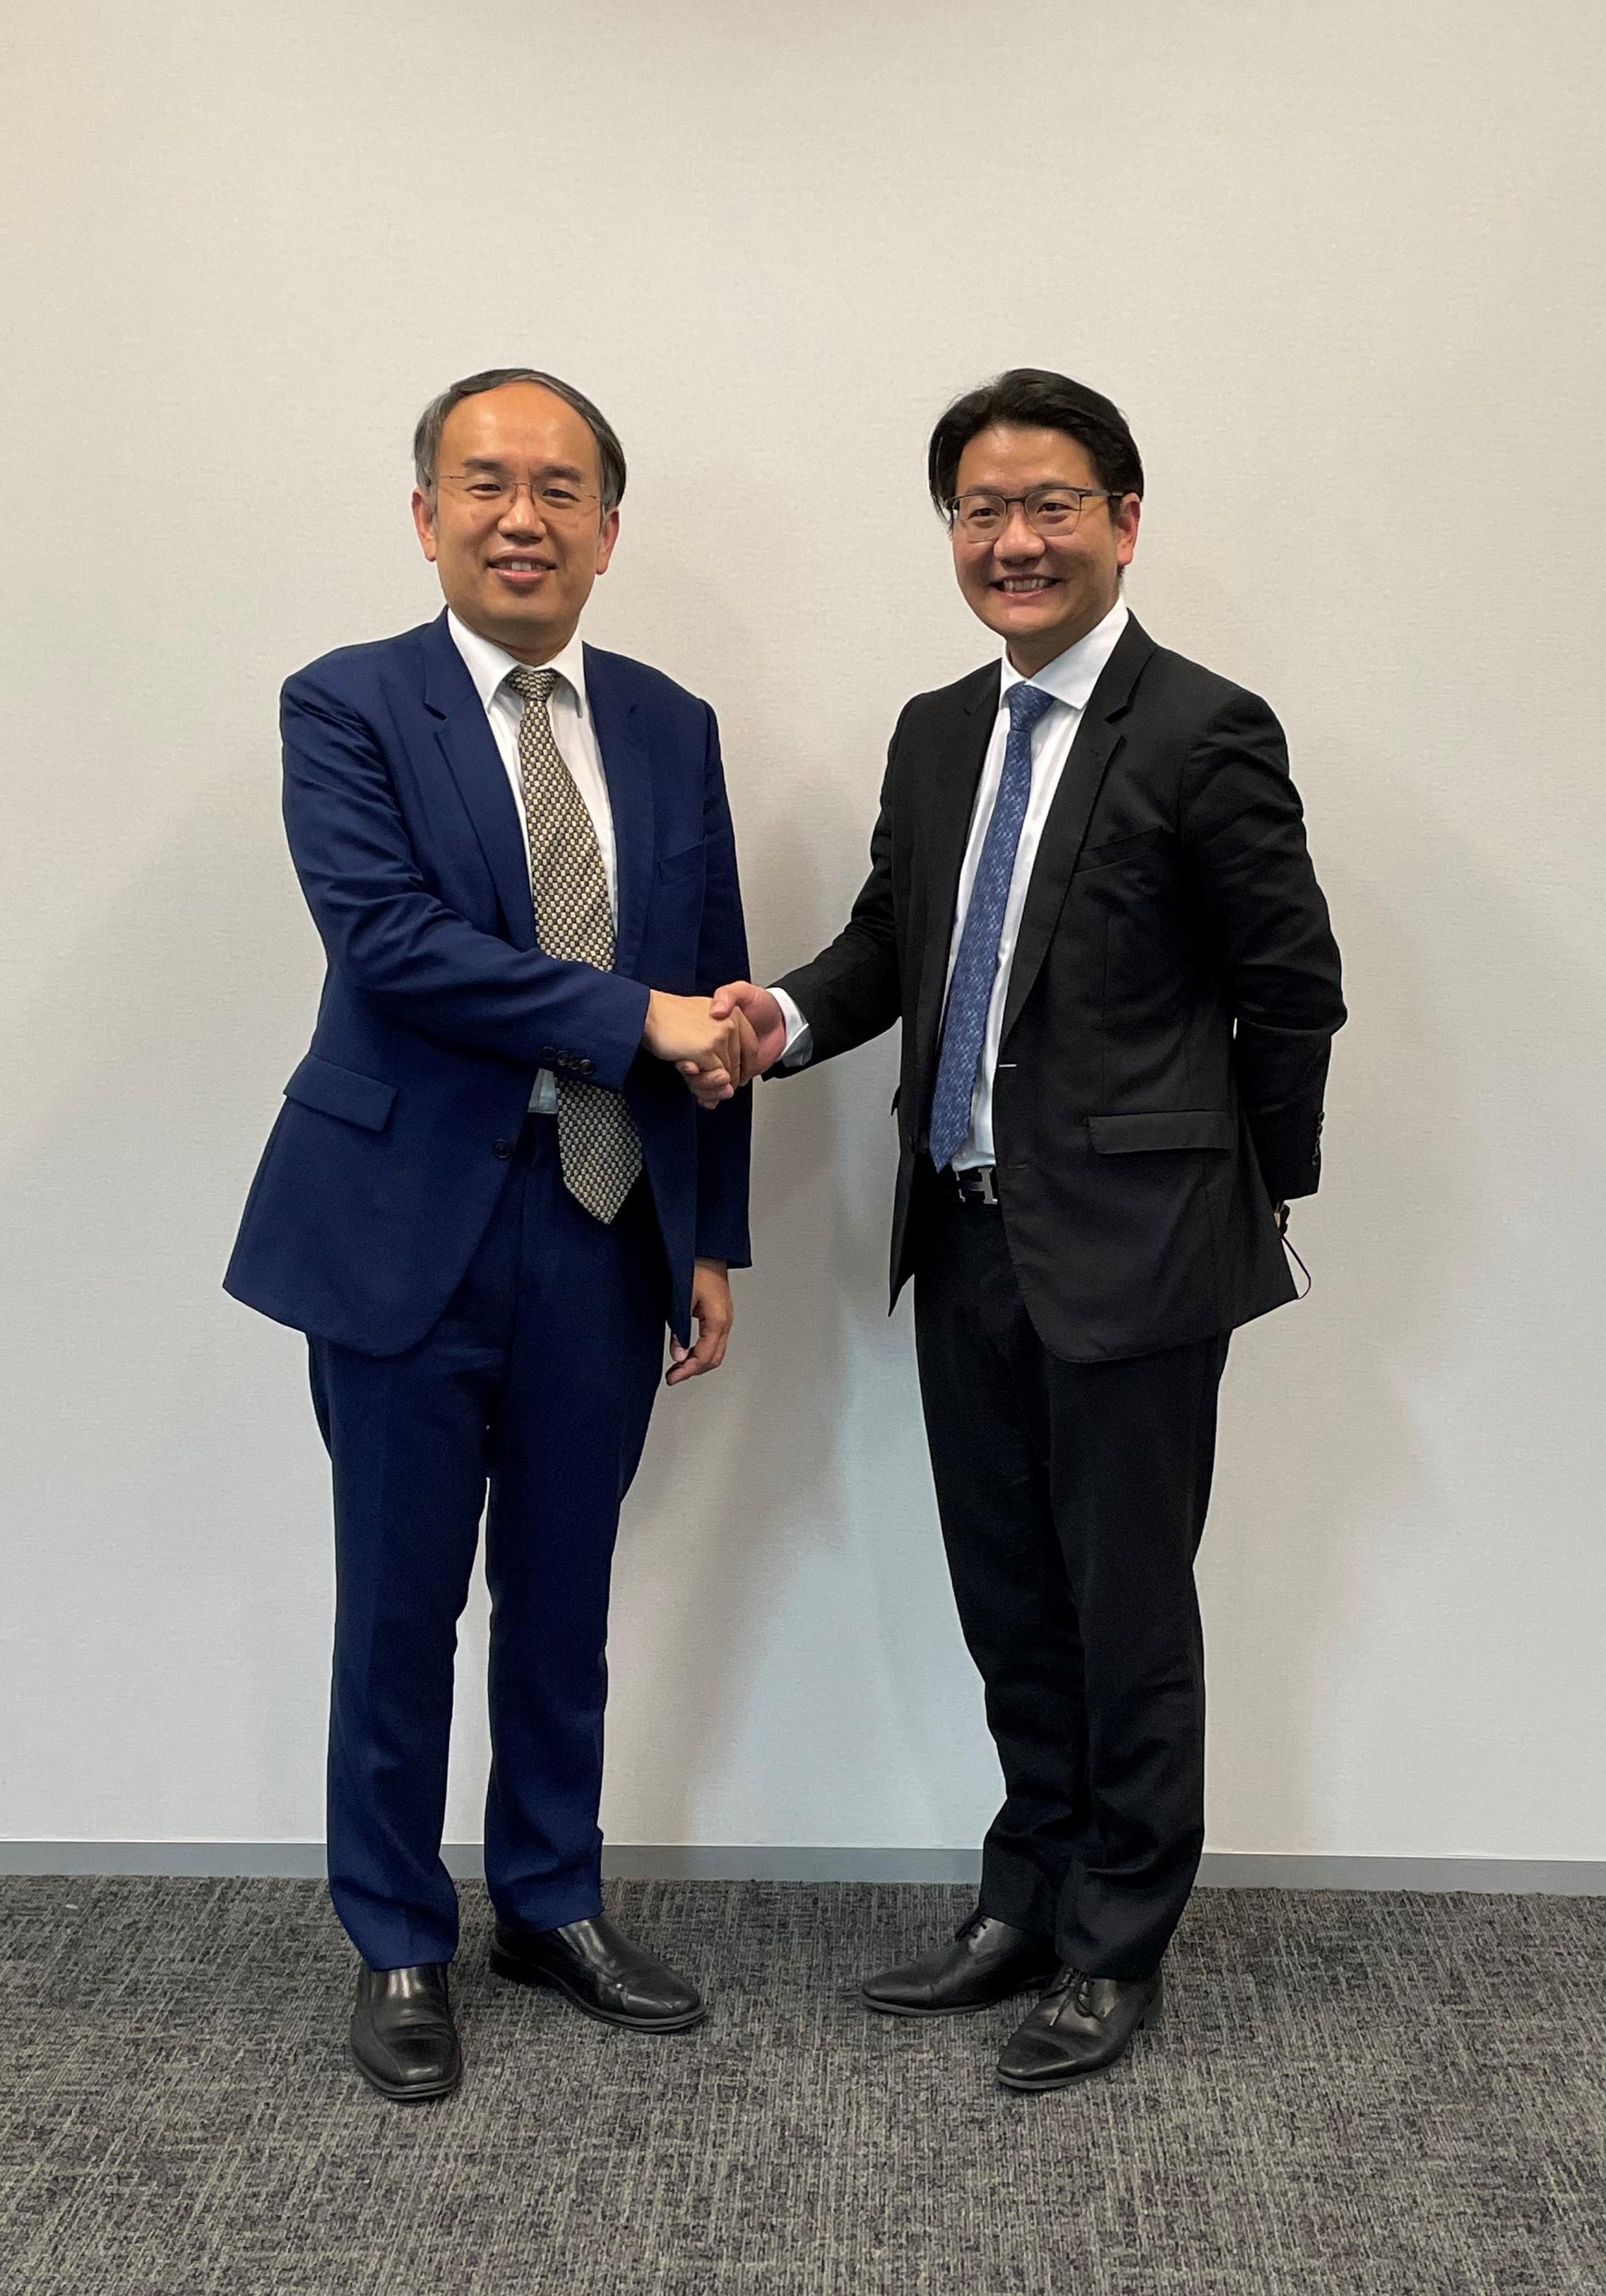 The Secretary for Financial Services and the Treasury, Mr Christopher Hui, today (October 21) continued his visit to Thailand. Photo shows Mr Hui (left) meeting with the President of the Thai Fintech Association, Mr Chonladet Khemarattana.